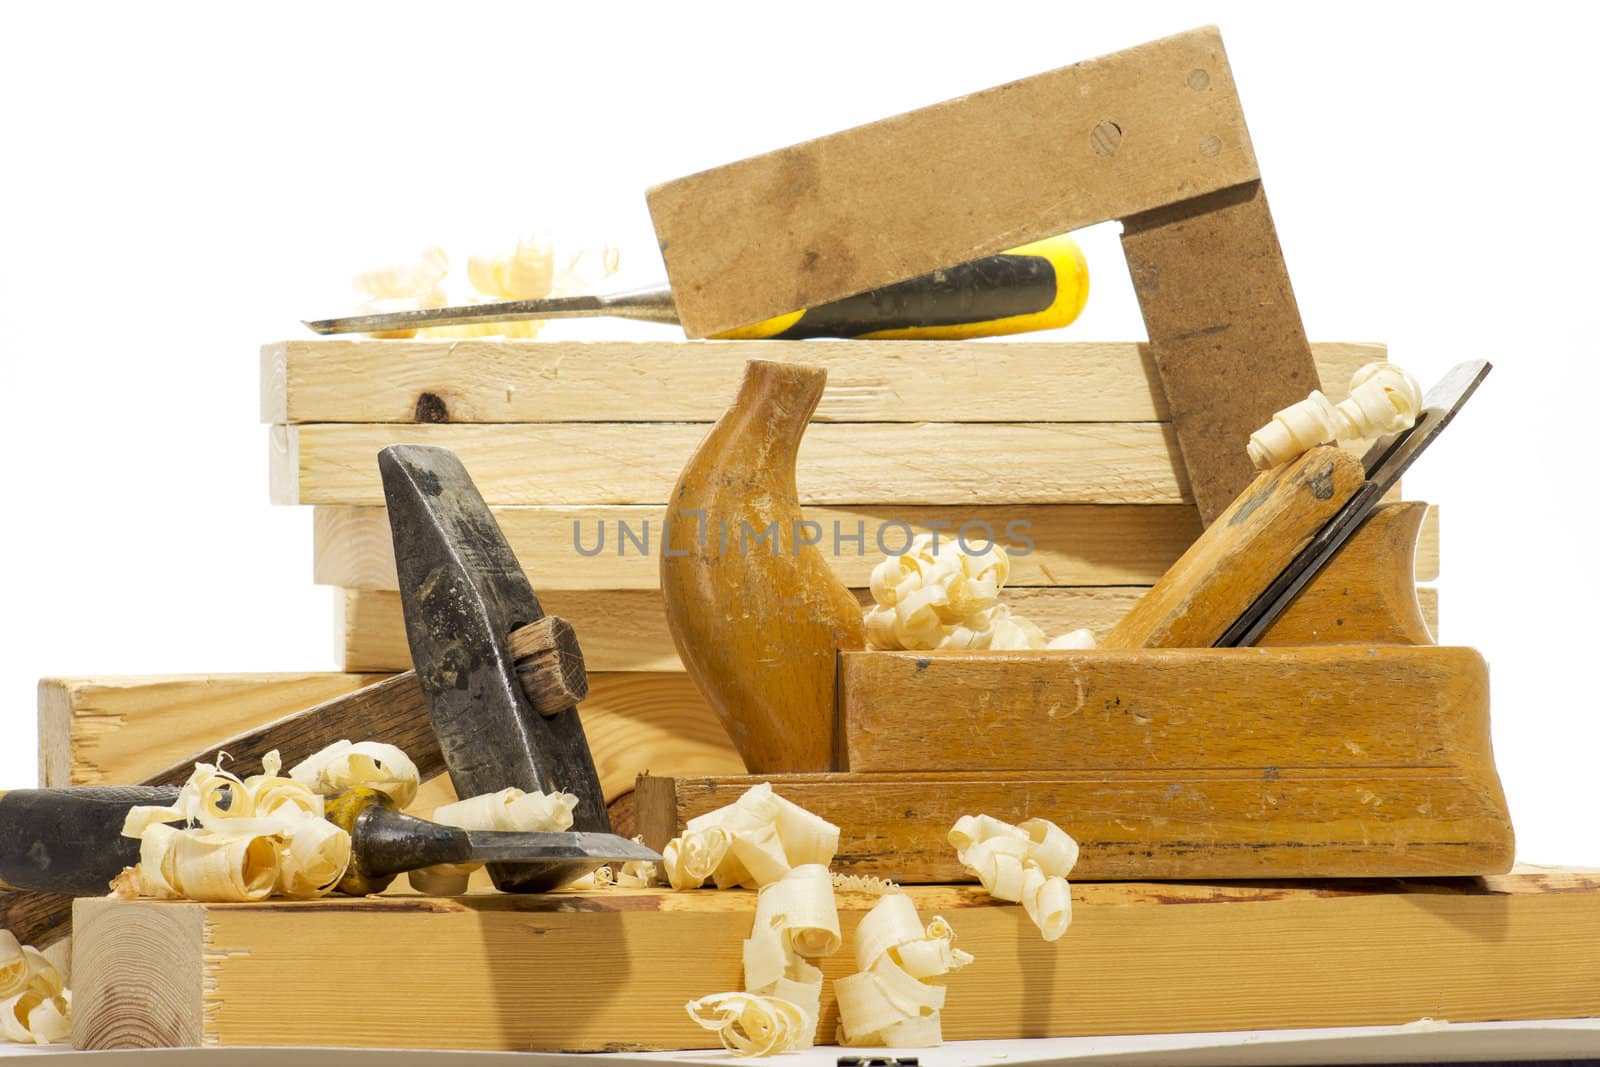 Wooden plane, boards and planed wood shavings on a white background